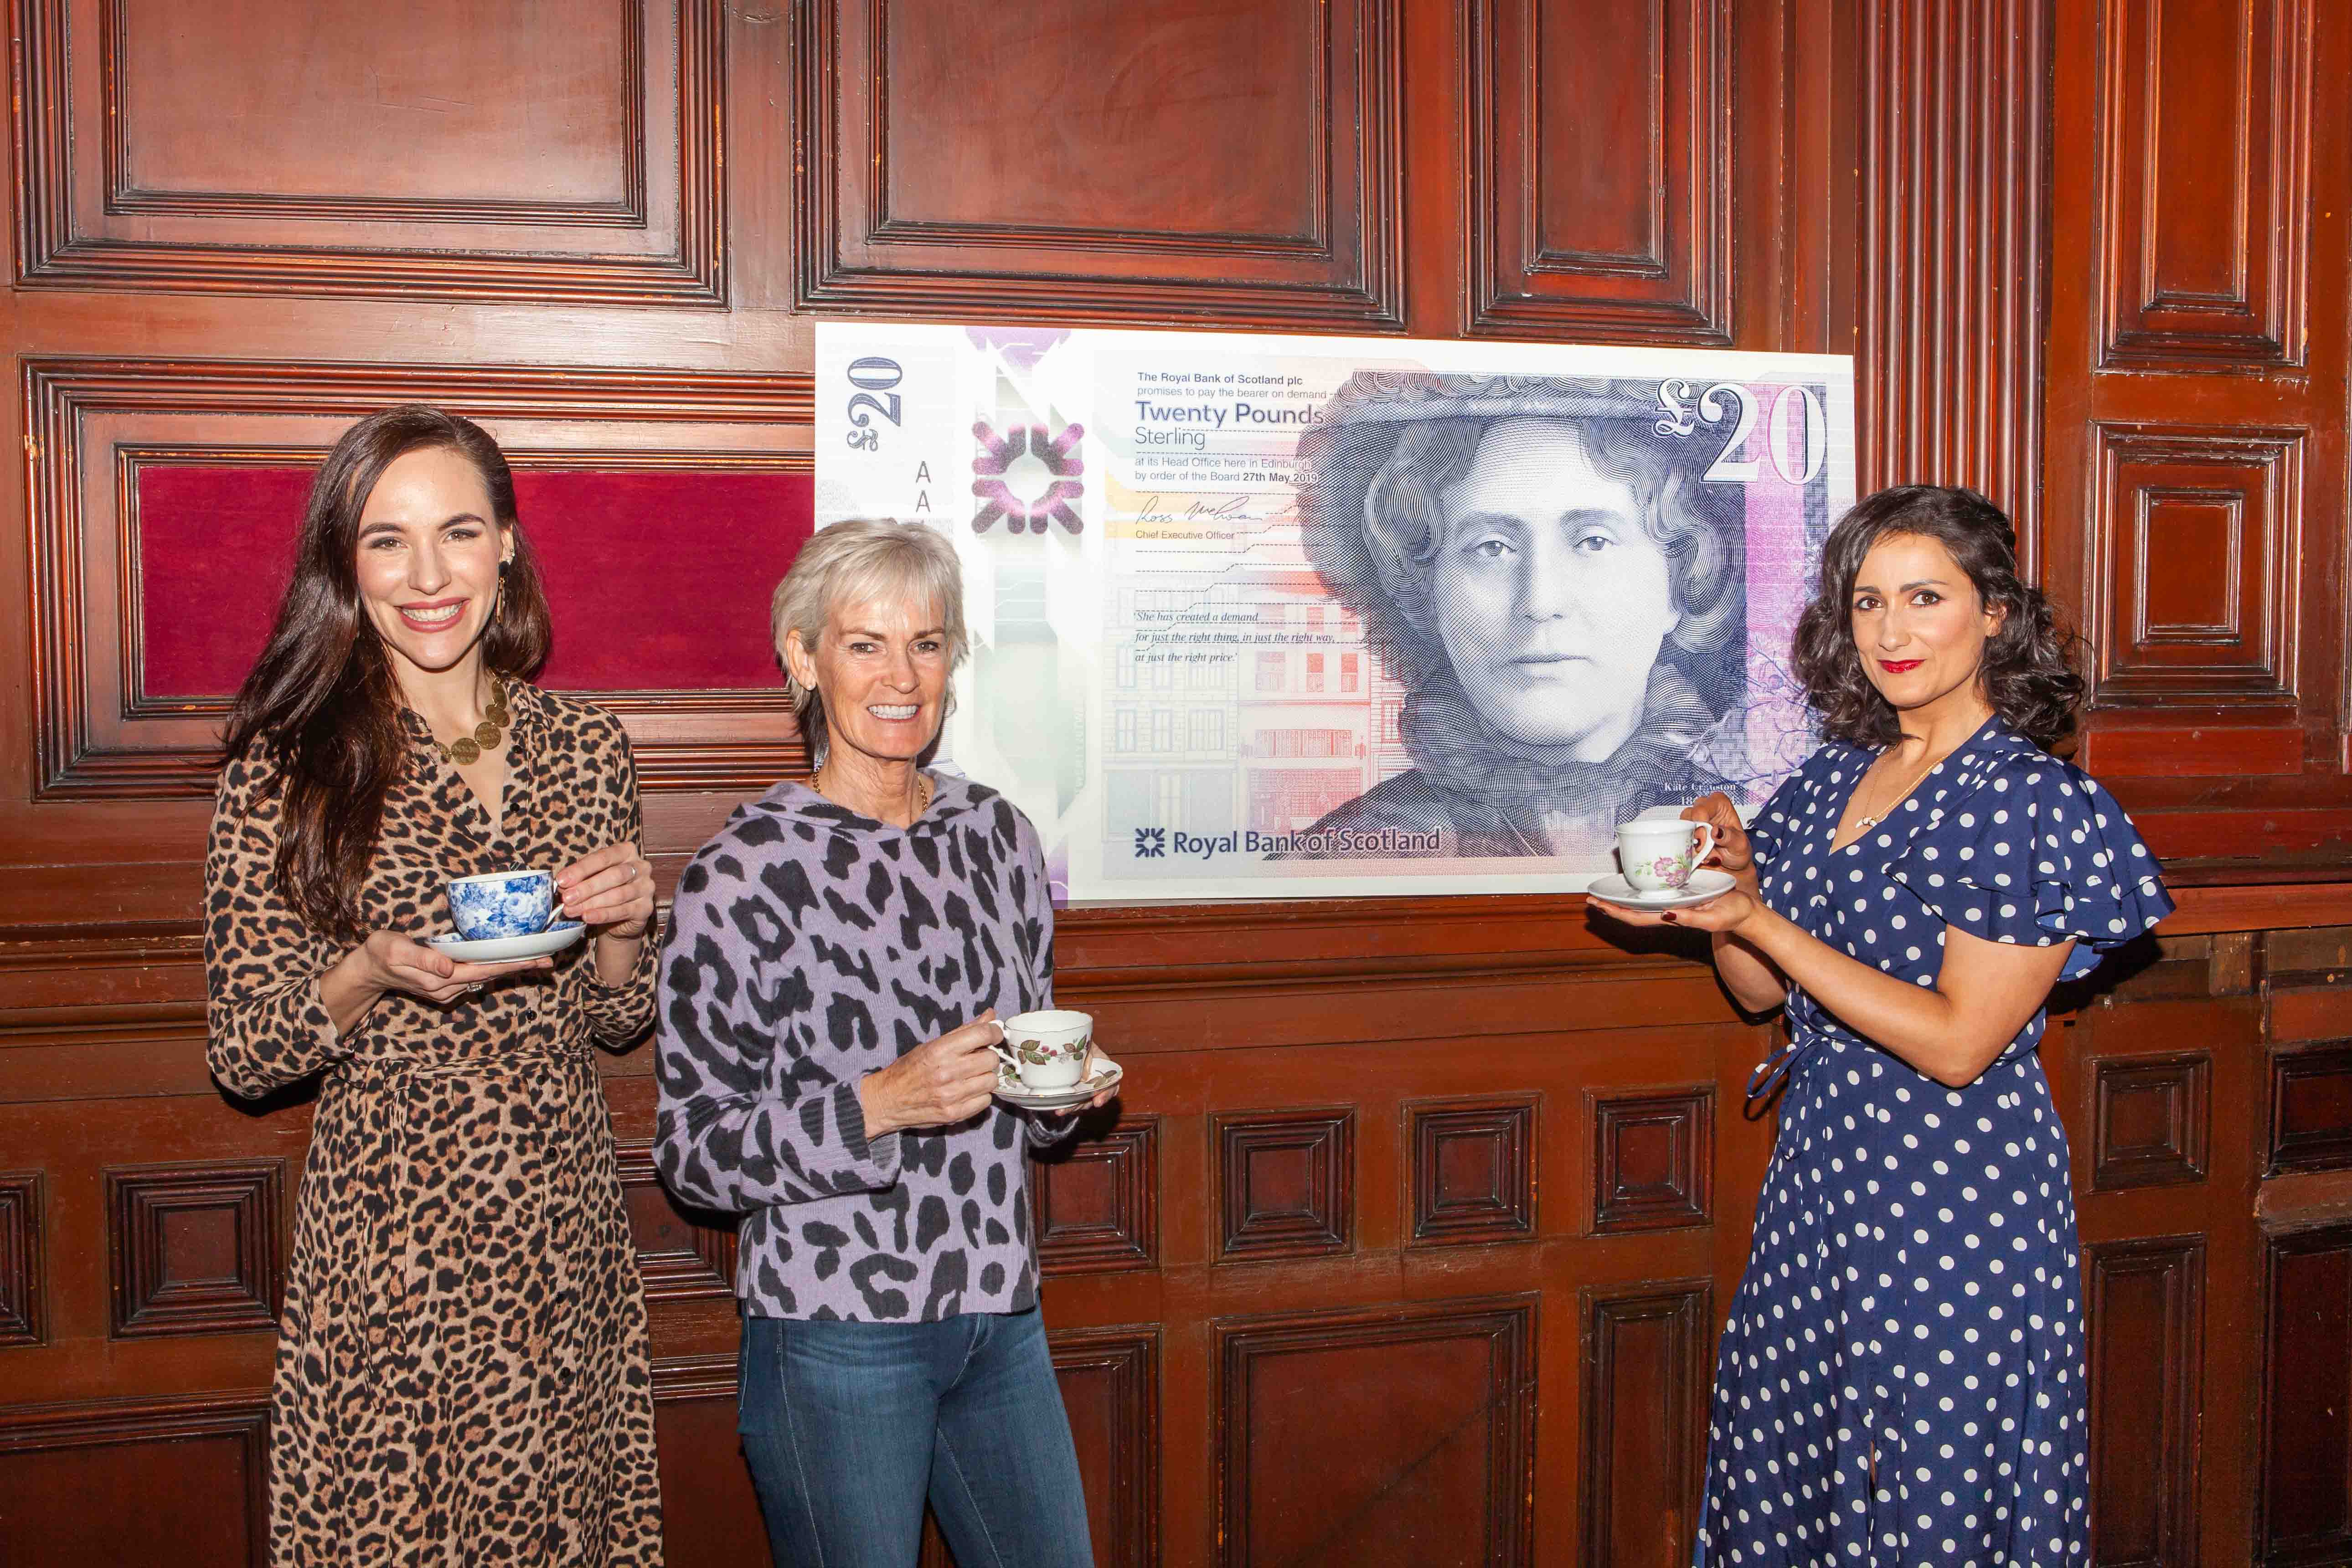 RBS's new £20 named one of world’s best bank notes